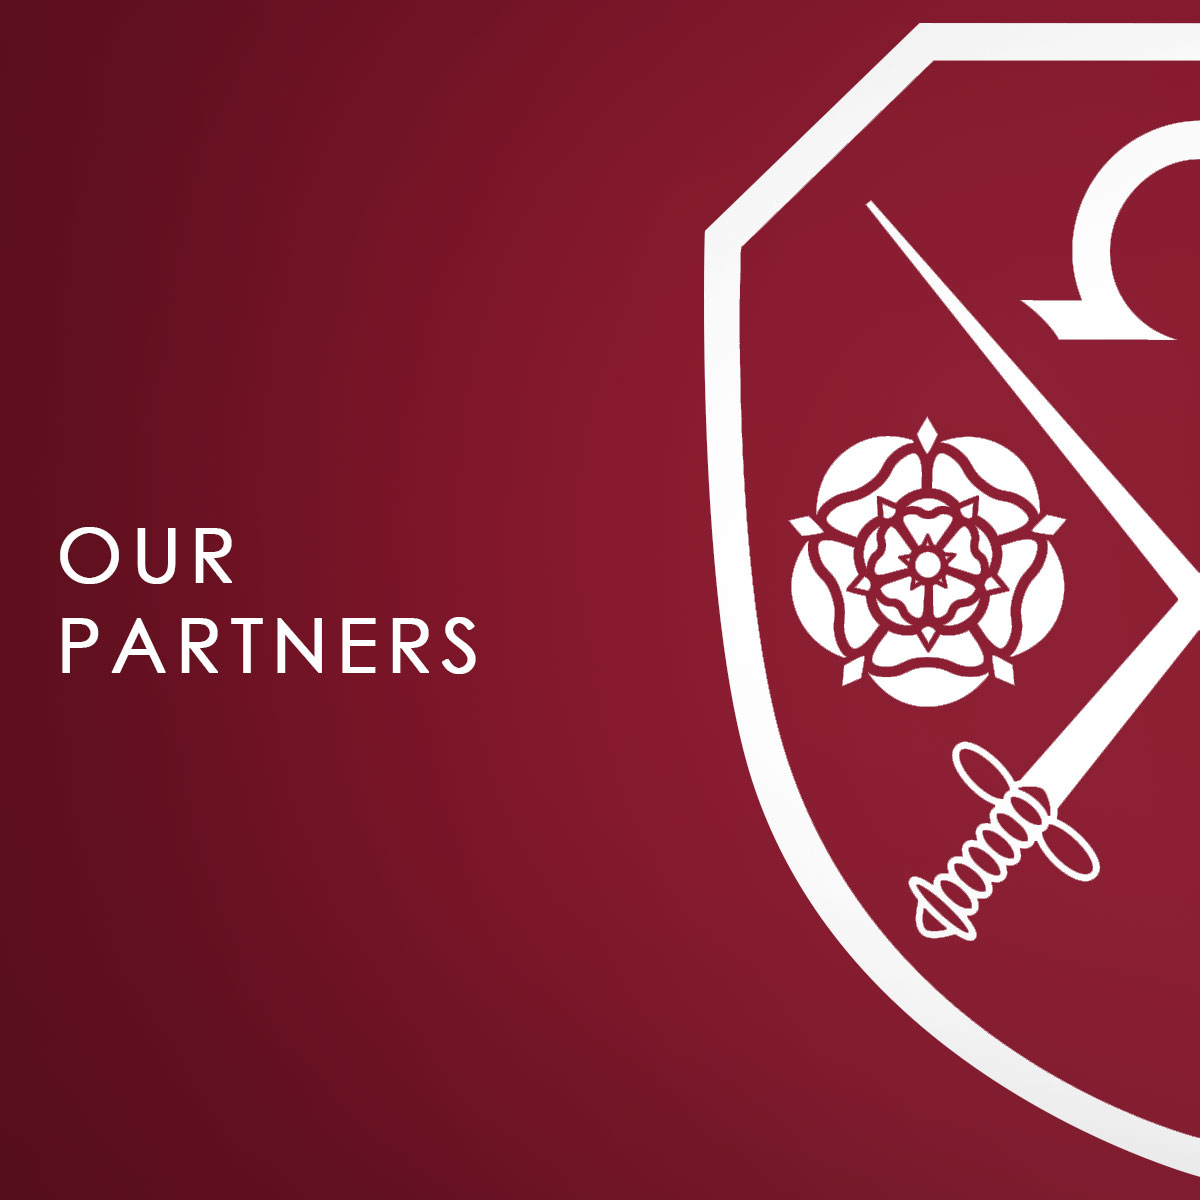 A maroon background with the East Barnet School logo which says about East Barnet School Partners